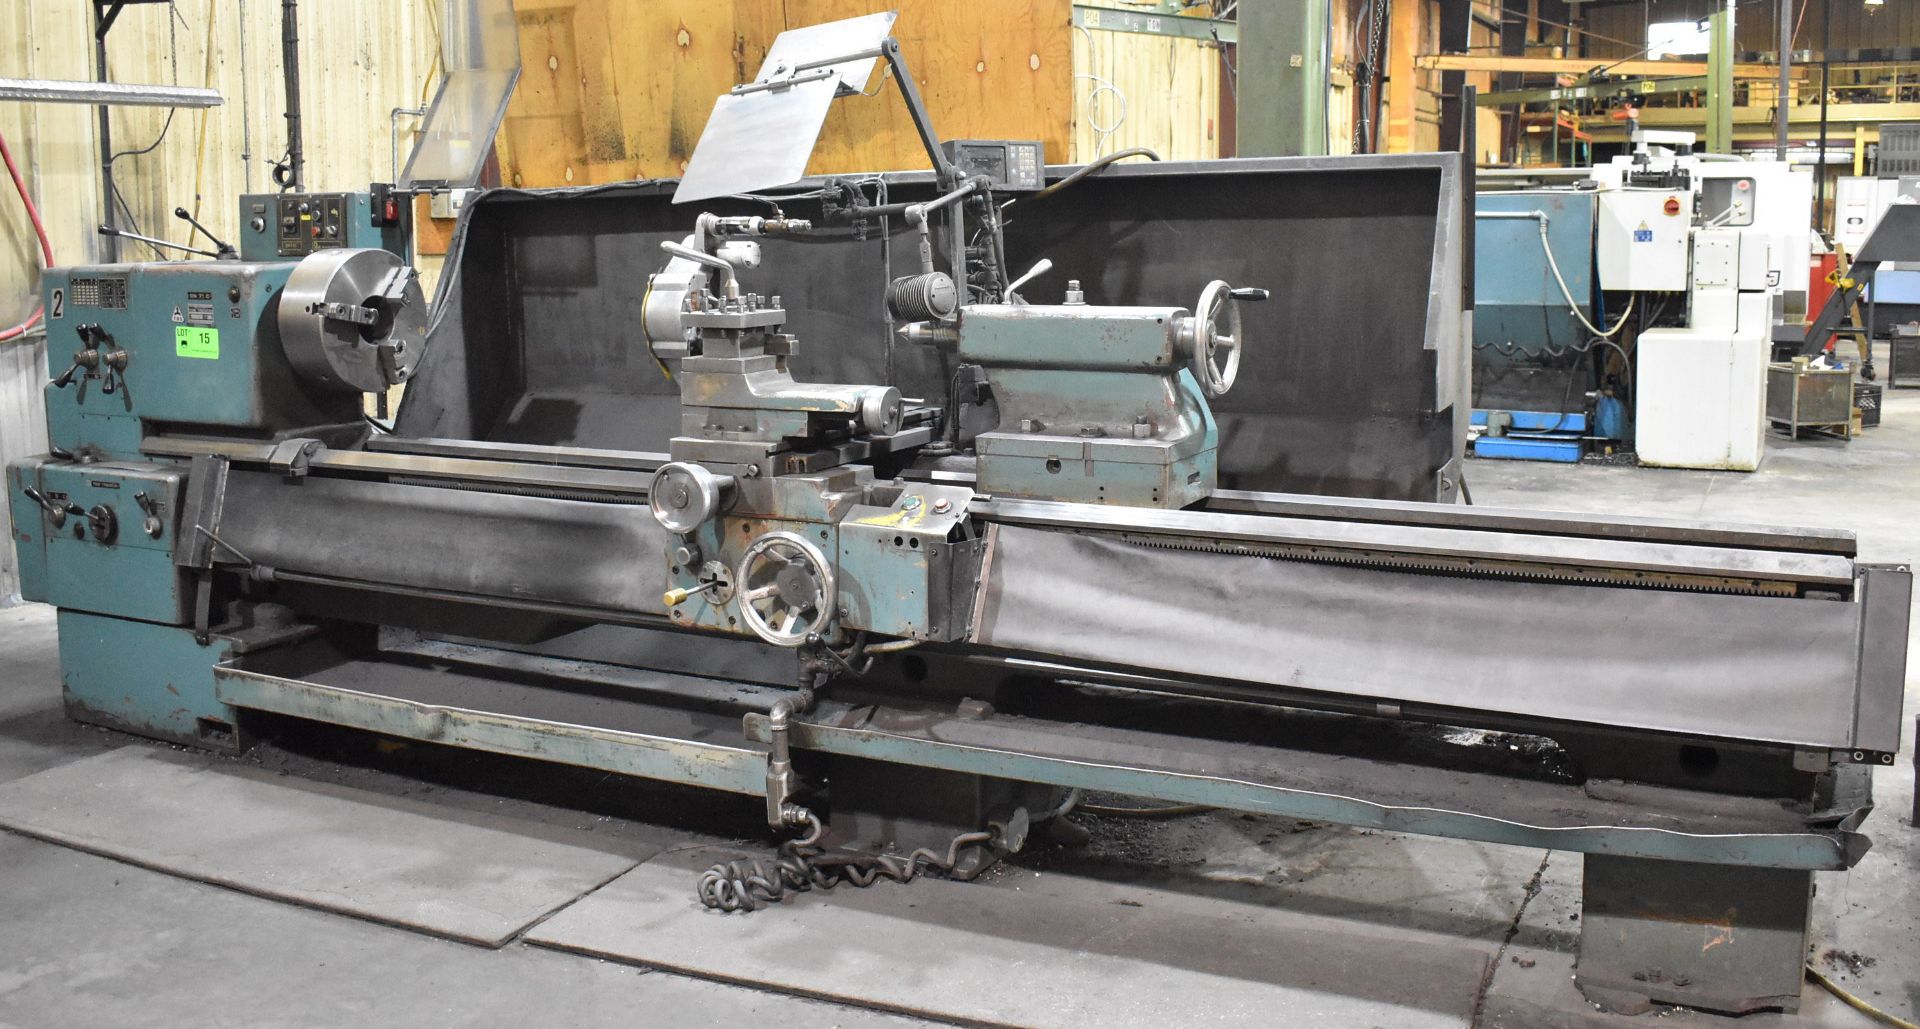 TOS SN 71 C GAP BED ENGINE LATHE WITH 30" SWING, 120" BETWEEN CENTERS, 3" SPINDLE BORE, SPEEDS TO